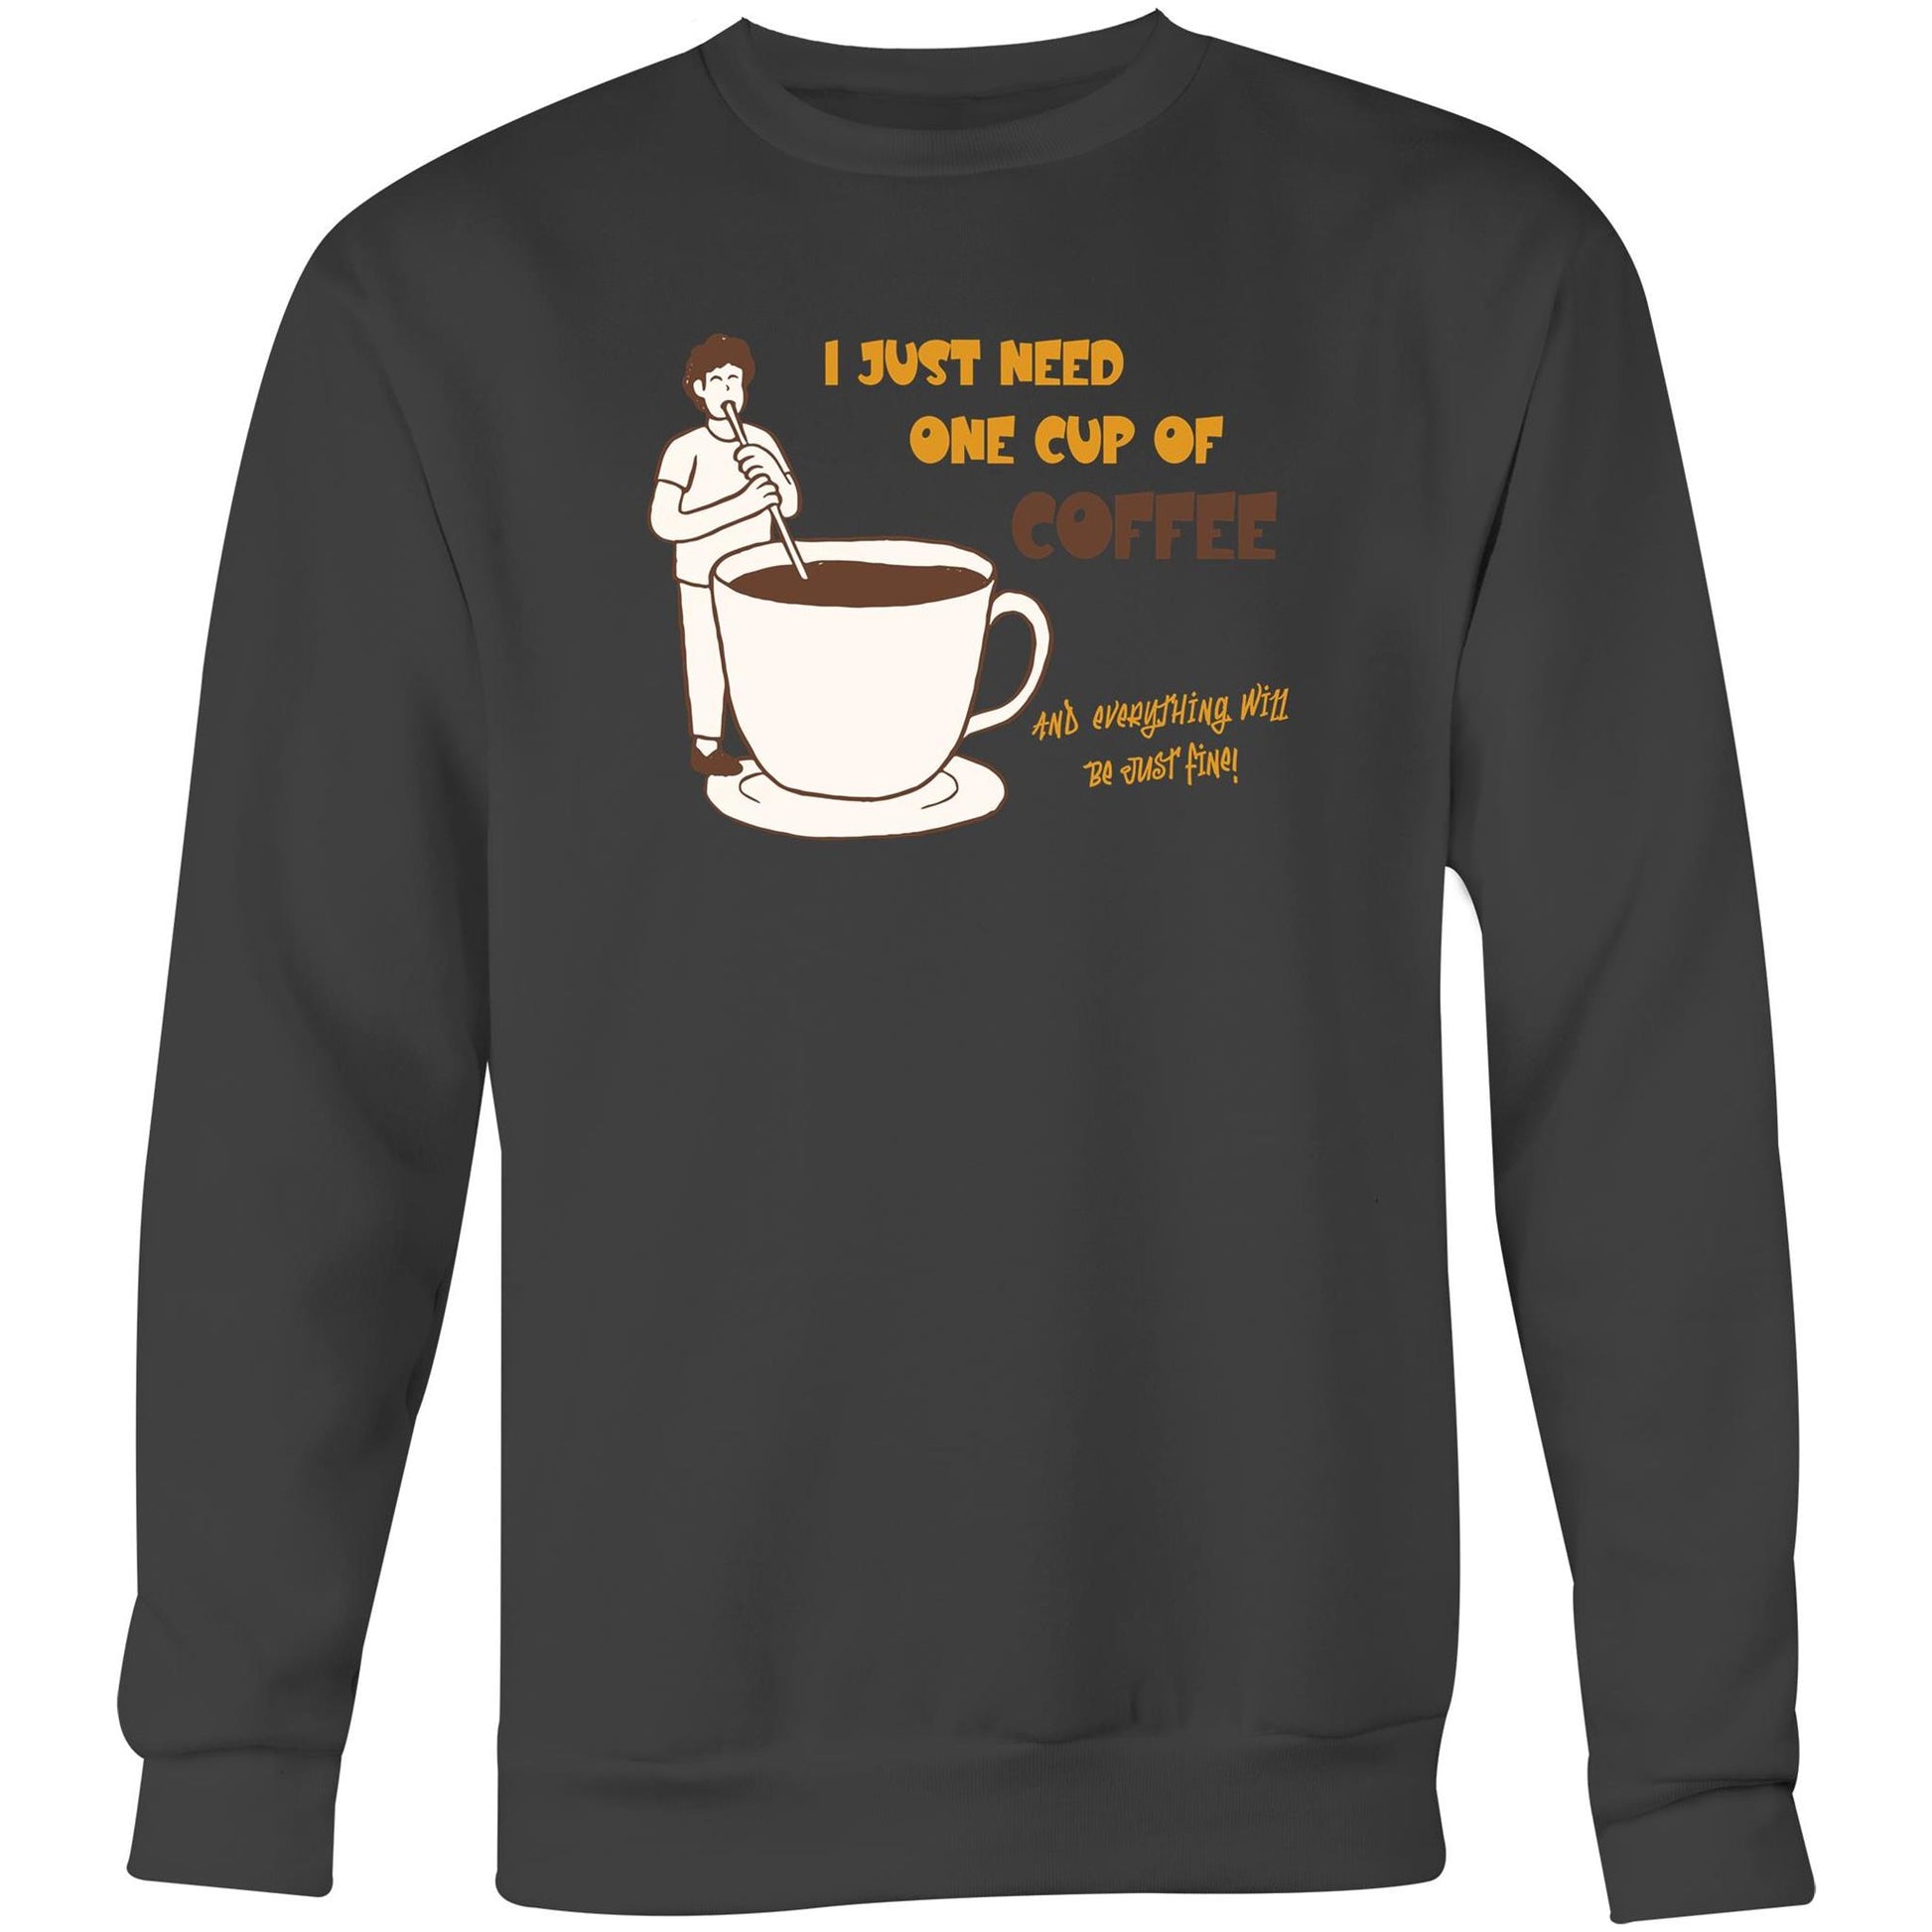 I Just Need One Cup Of Coffee And Everything Will Be Just Fine - Crew Sweatshirt Coal Sweatshirt Coffee